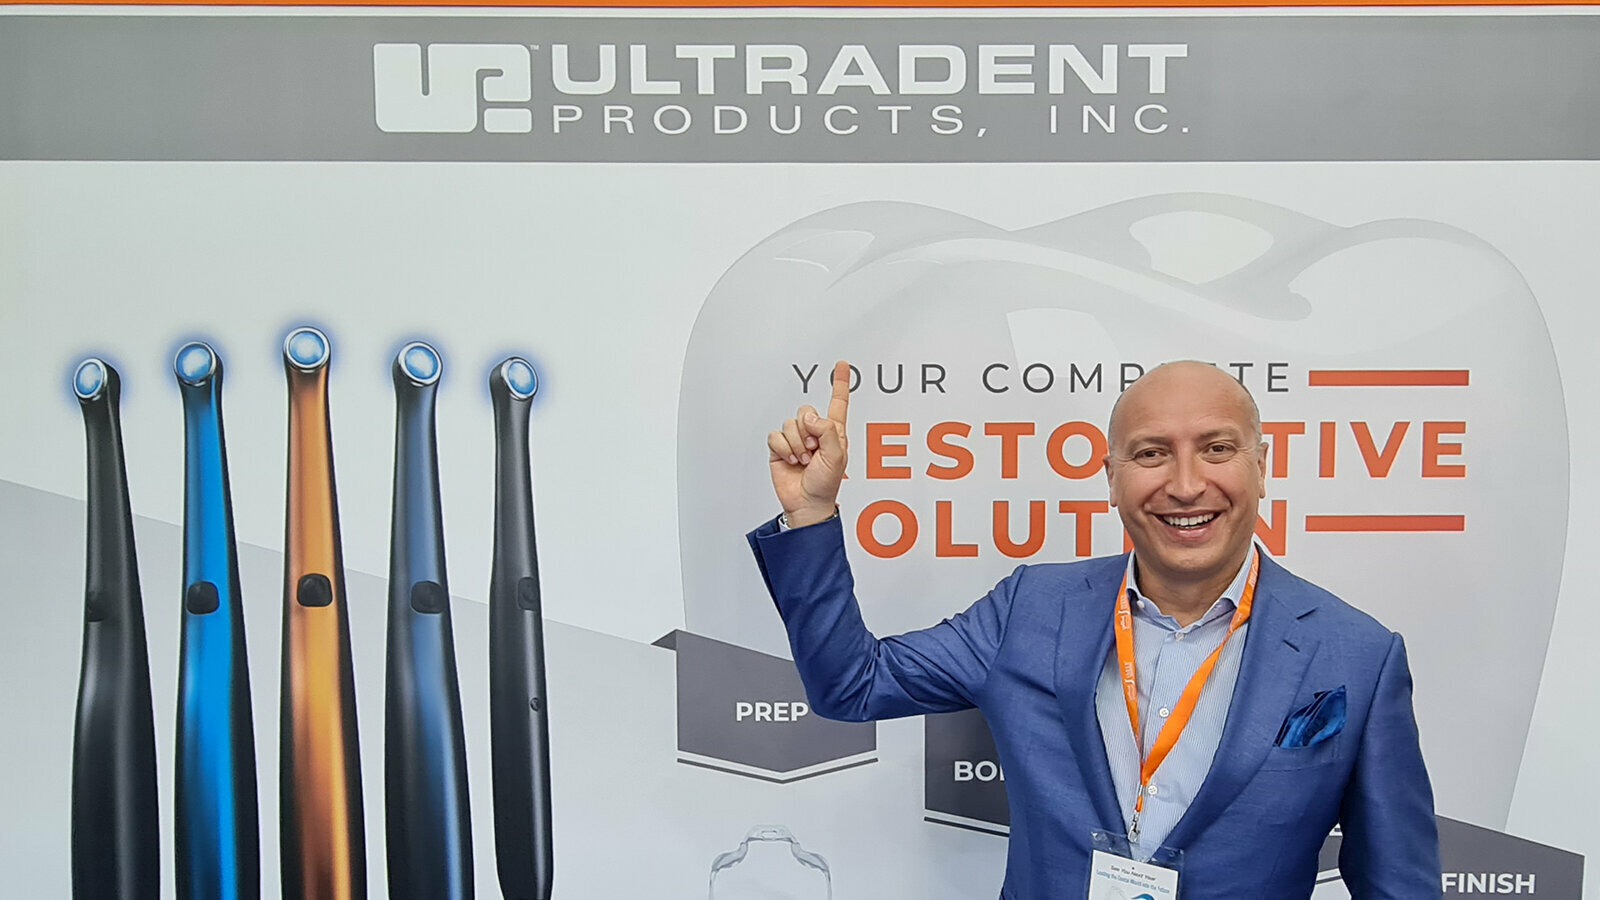 Interview: “The new materials launched on the market in recent years dramatically changed the way we do dentistry…”
